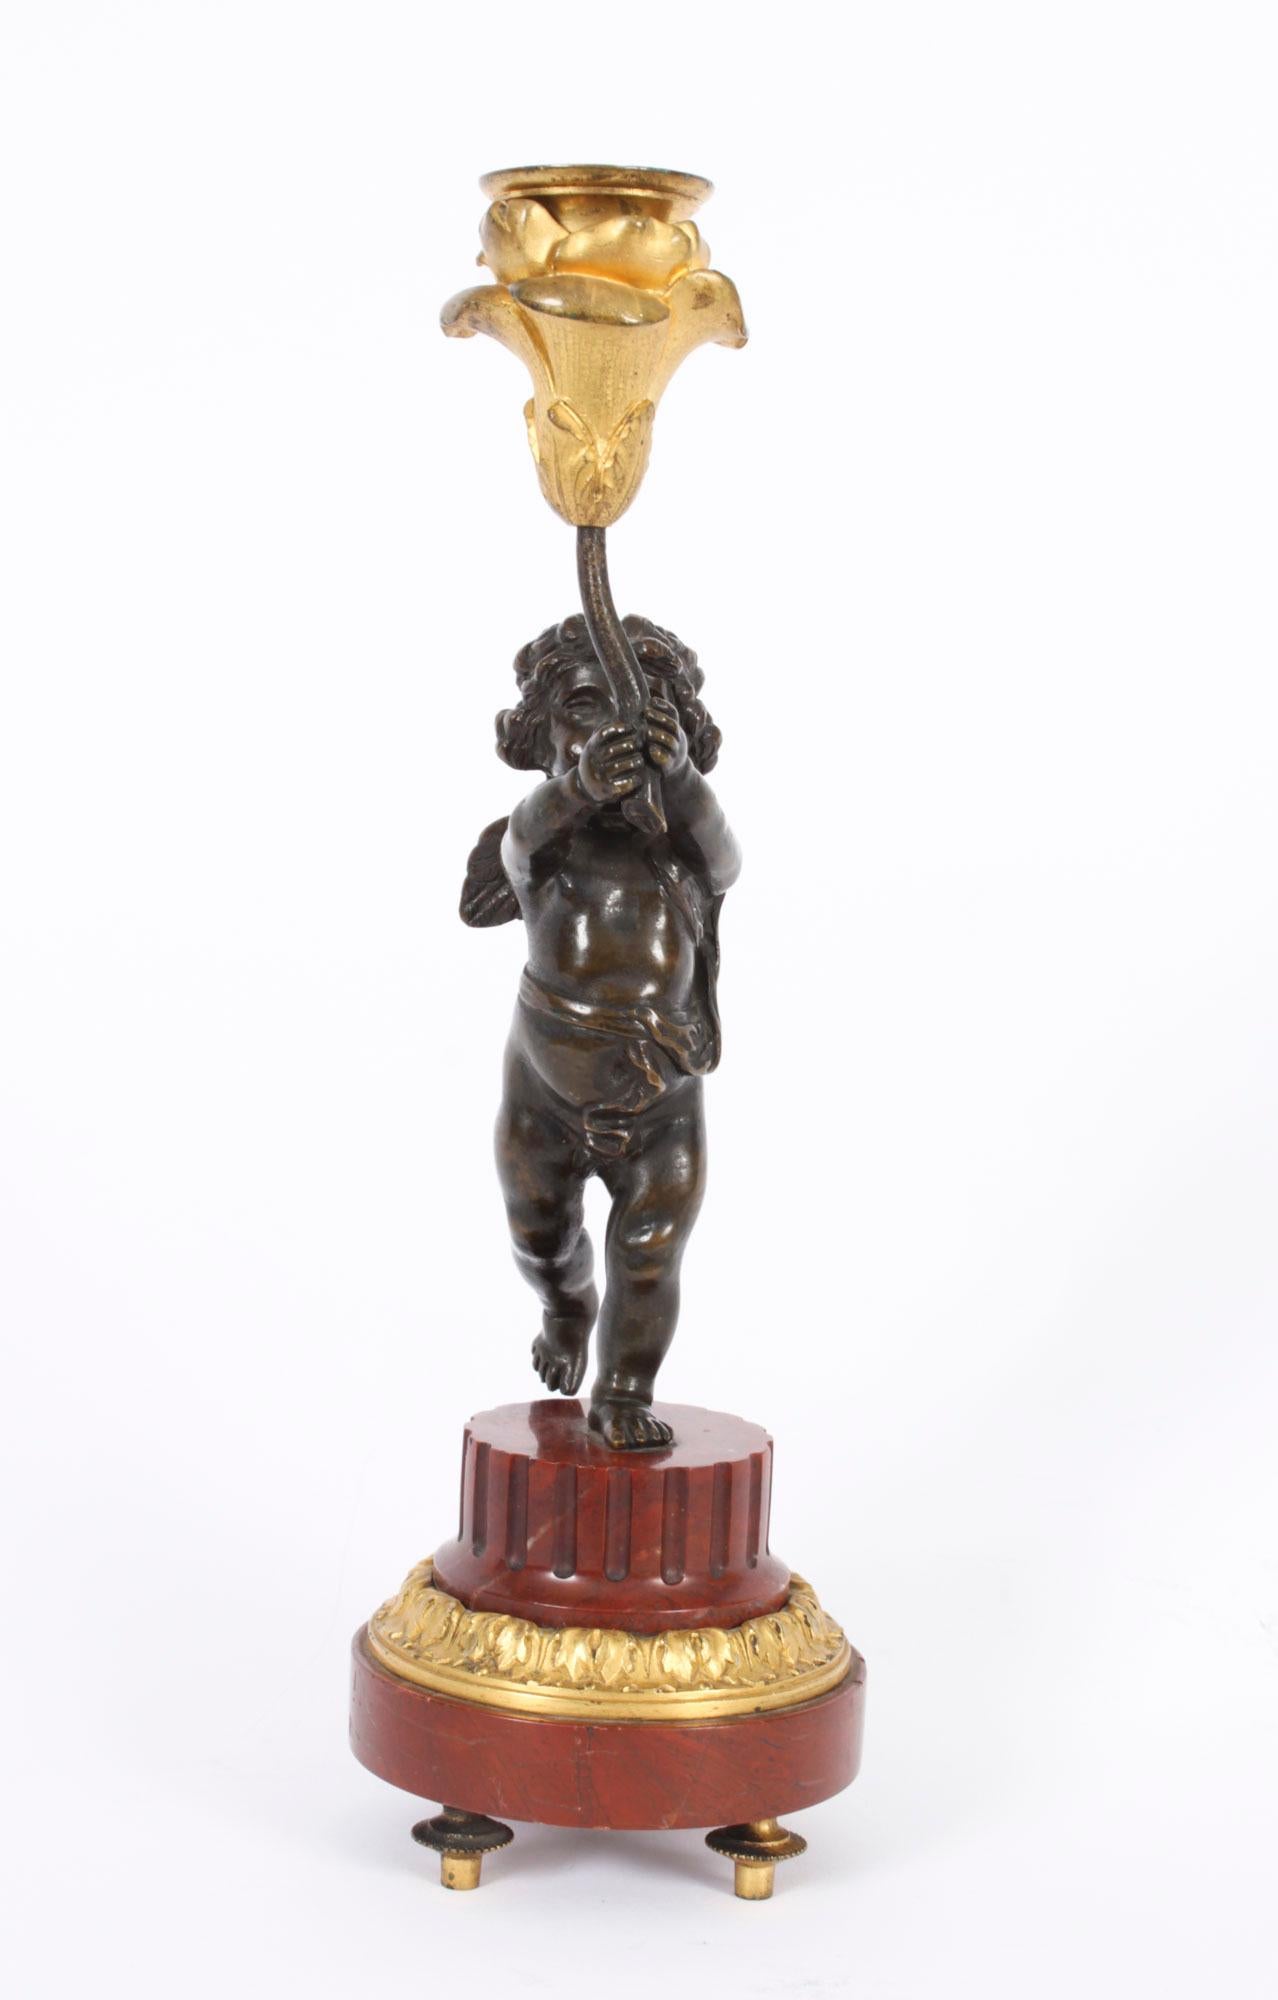 A magnificent antique French ormolu and patinated bronze cherub candle stick, C1850 in date.

The stunning patinated bronze  cherub holding a gilded tulip candle stick above his head.

Raised on an elaborately carved circular red marble stepped base